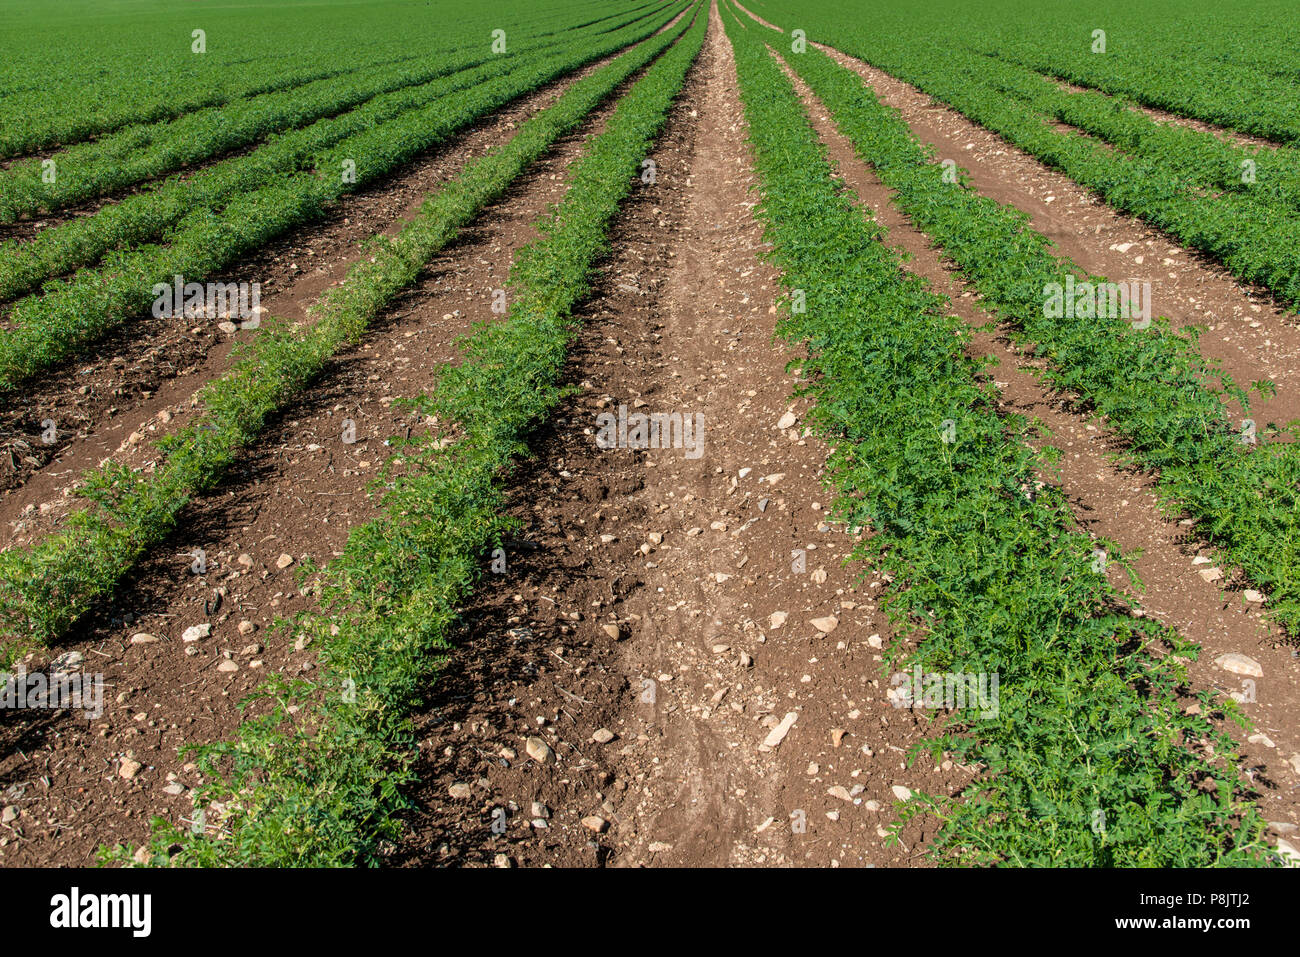 Rows of humus crops in a field Stock Photo